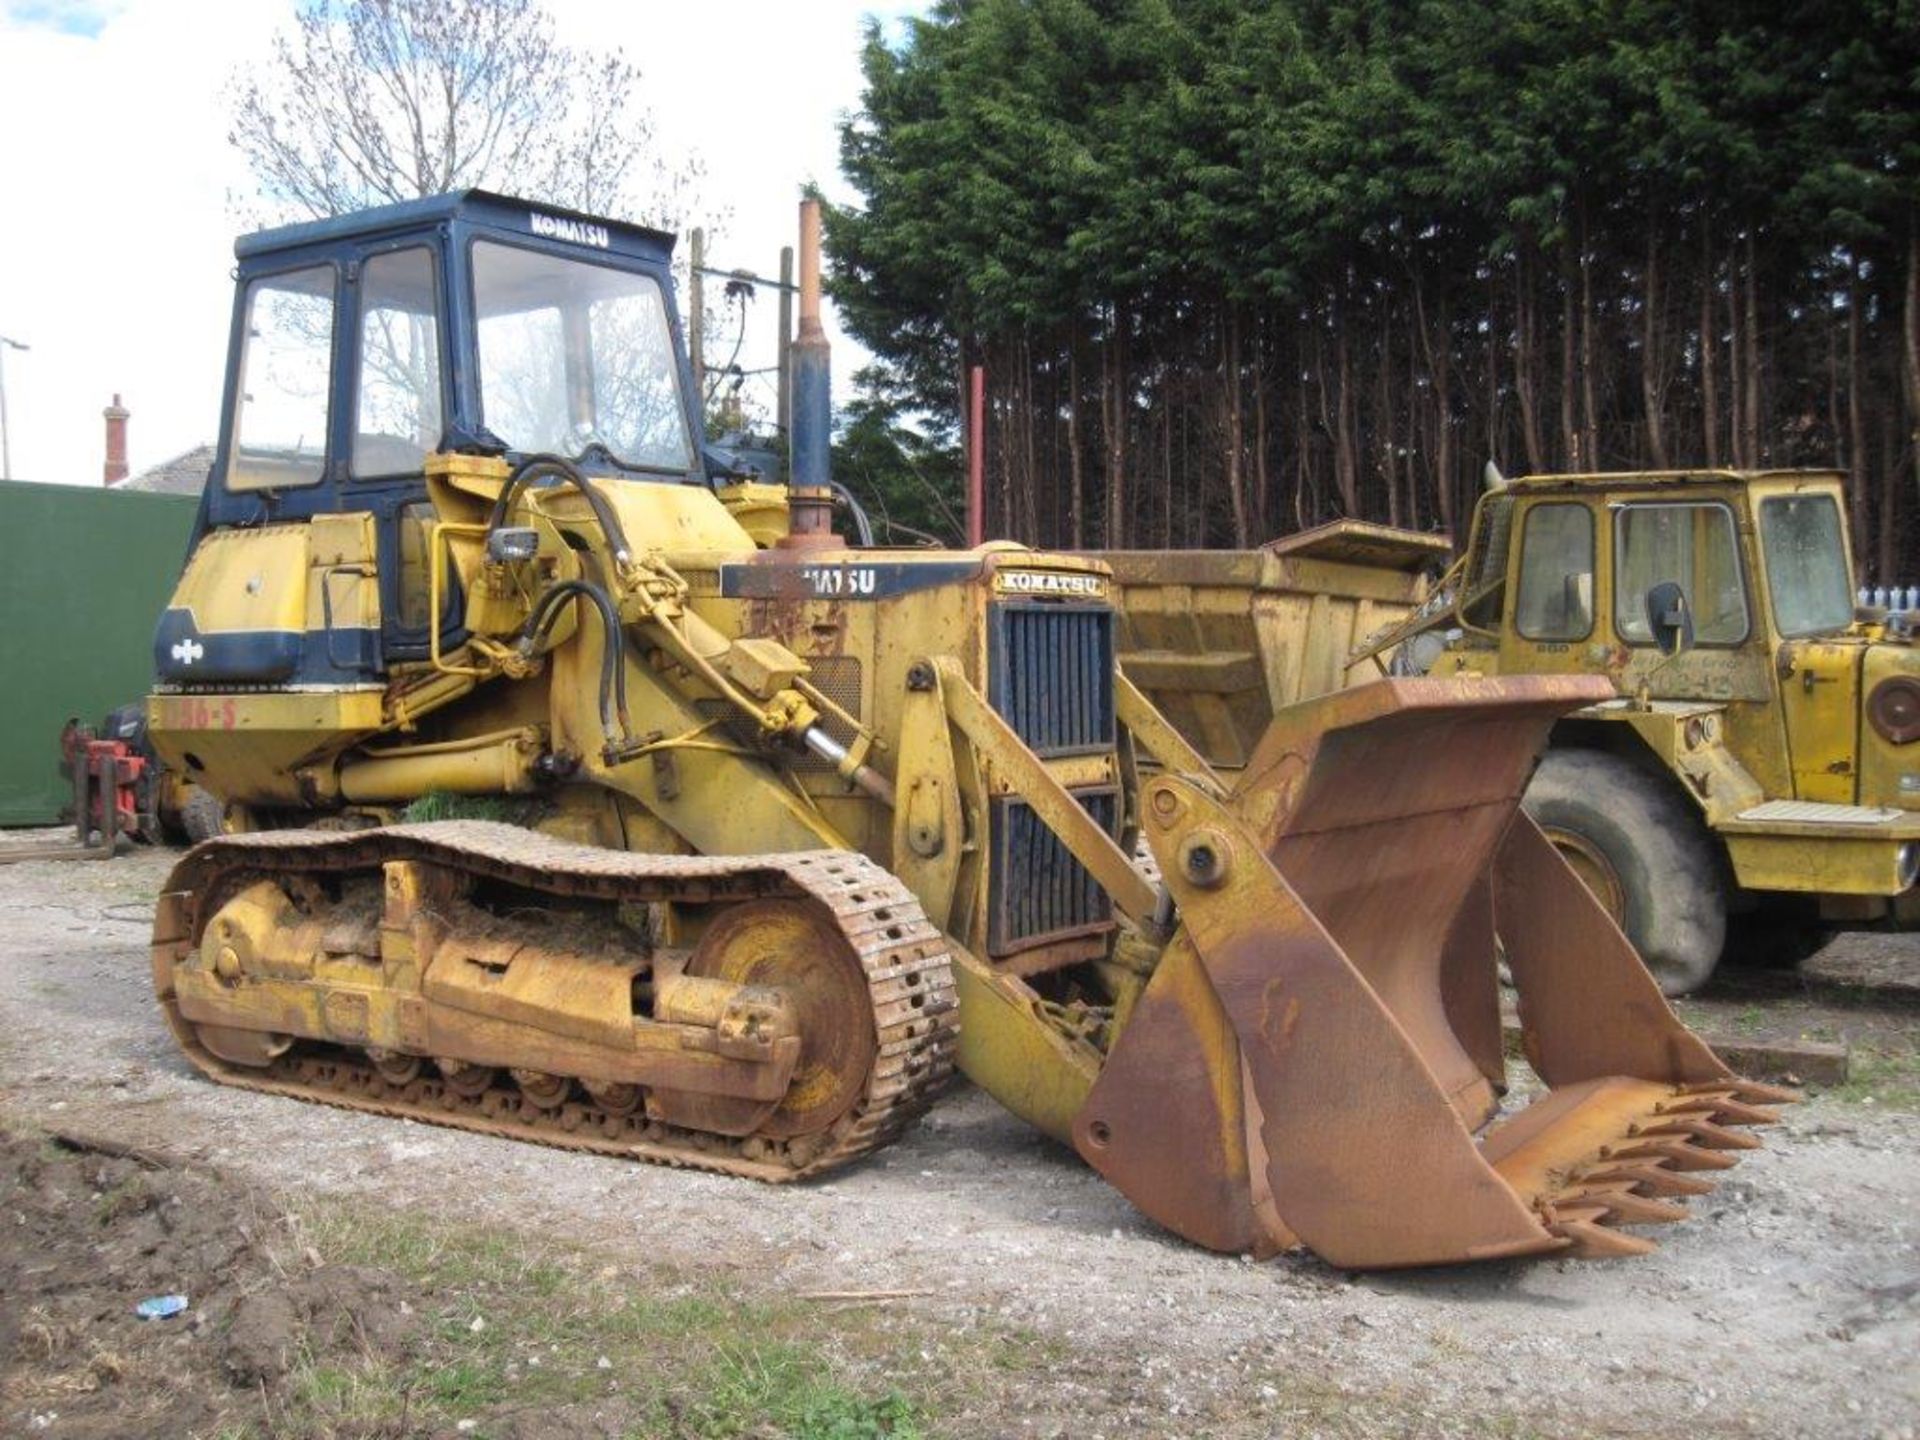 Komatsu Tracked Loading Shovel_x00D_
Good condition for age, 4 in 1 bucket with teeth and good - Image 3 of 6